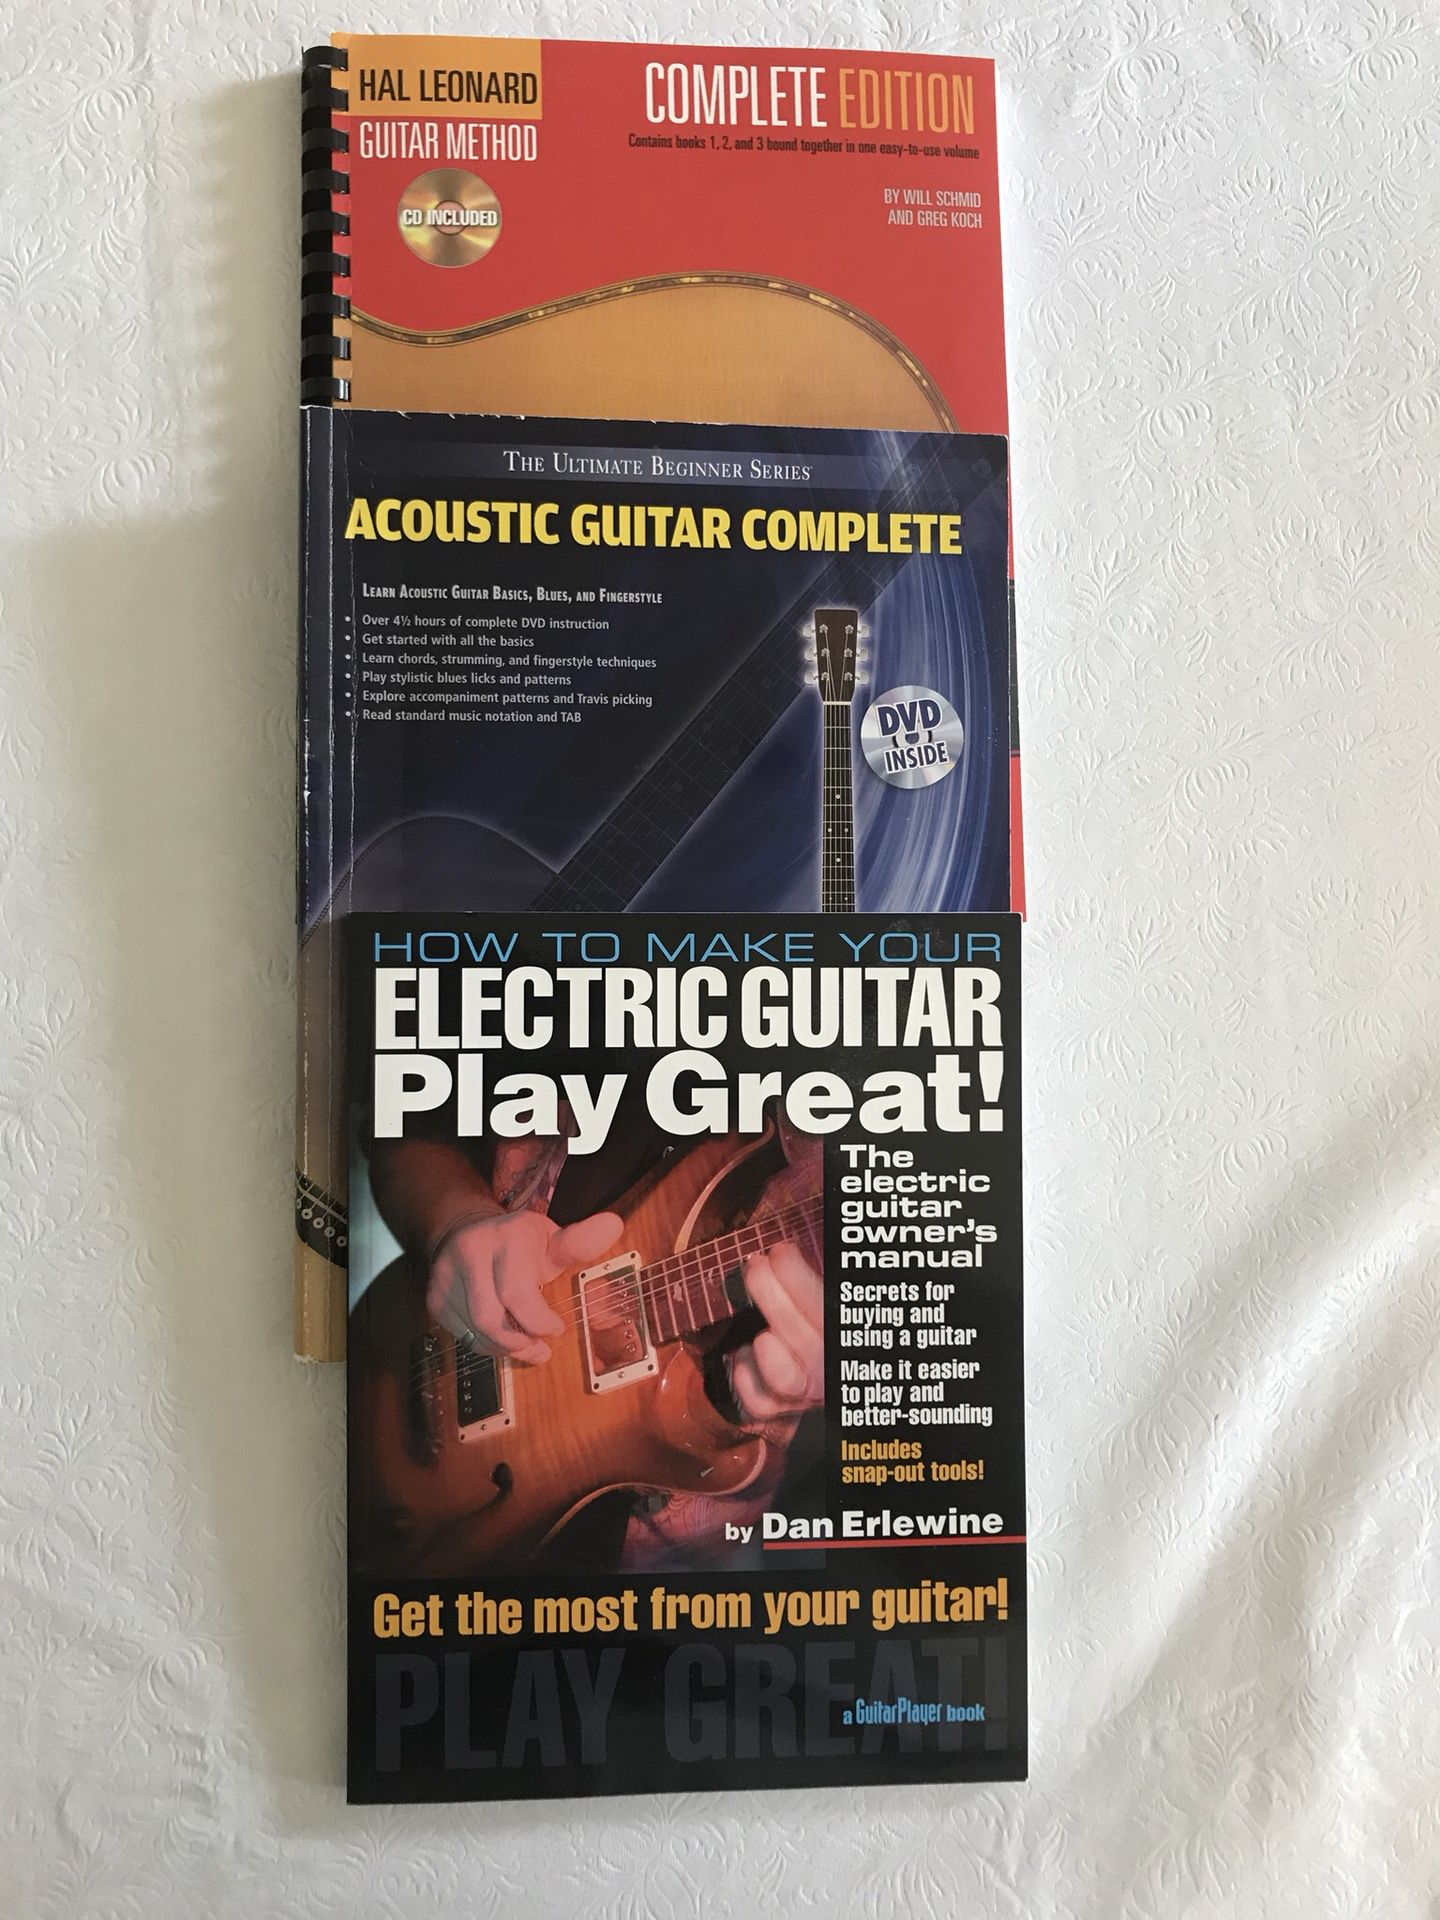 Guitar books, 3 total: Hal Leonard’s Guitar Method complete Edition, Acoustic Guitar Complete,How to Make Your Electric Guitar Play Great